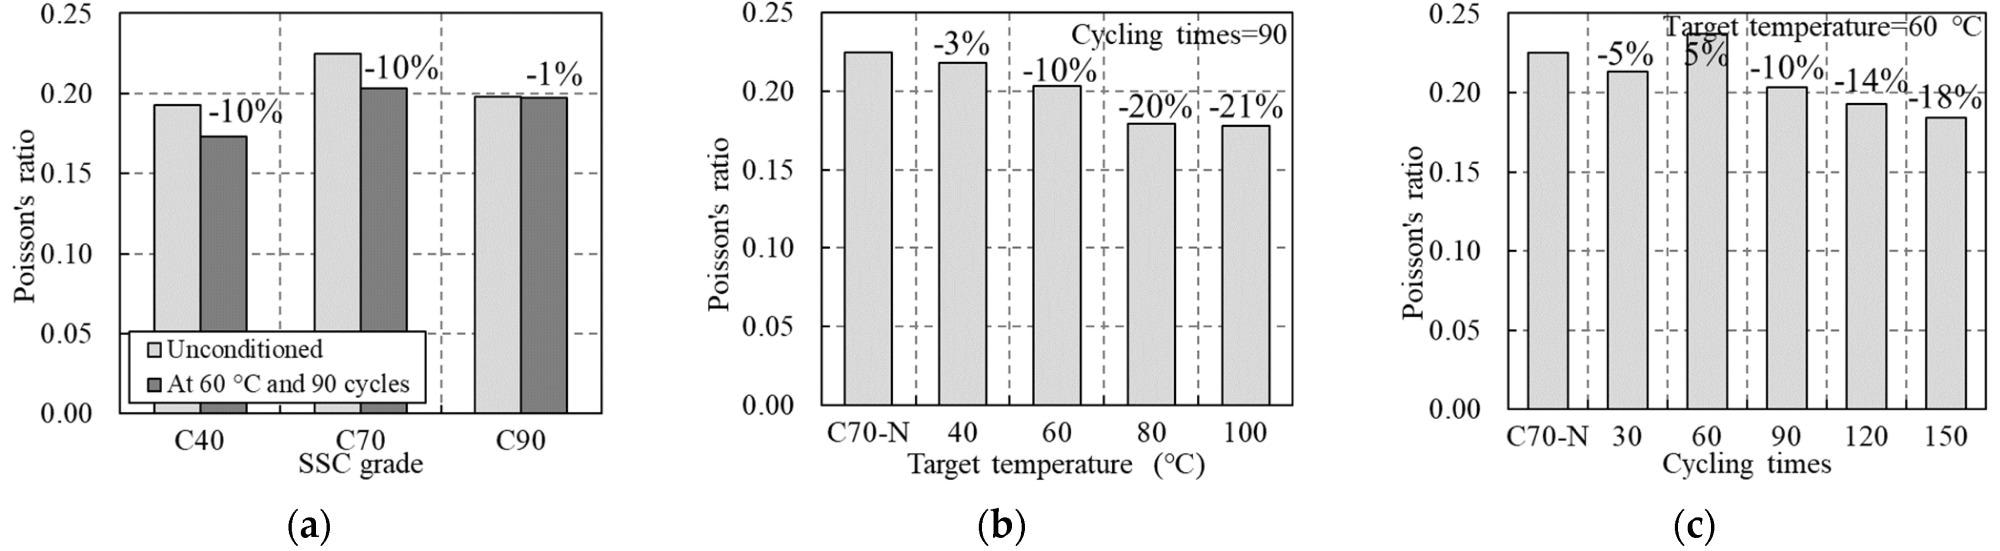 Poisson’s ratio of SSC: (a) effects of SSC grade; (b) effects of target temperature; (c) effects of cycling times.